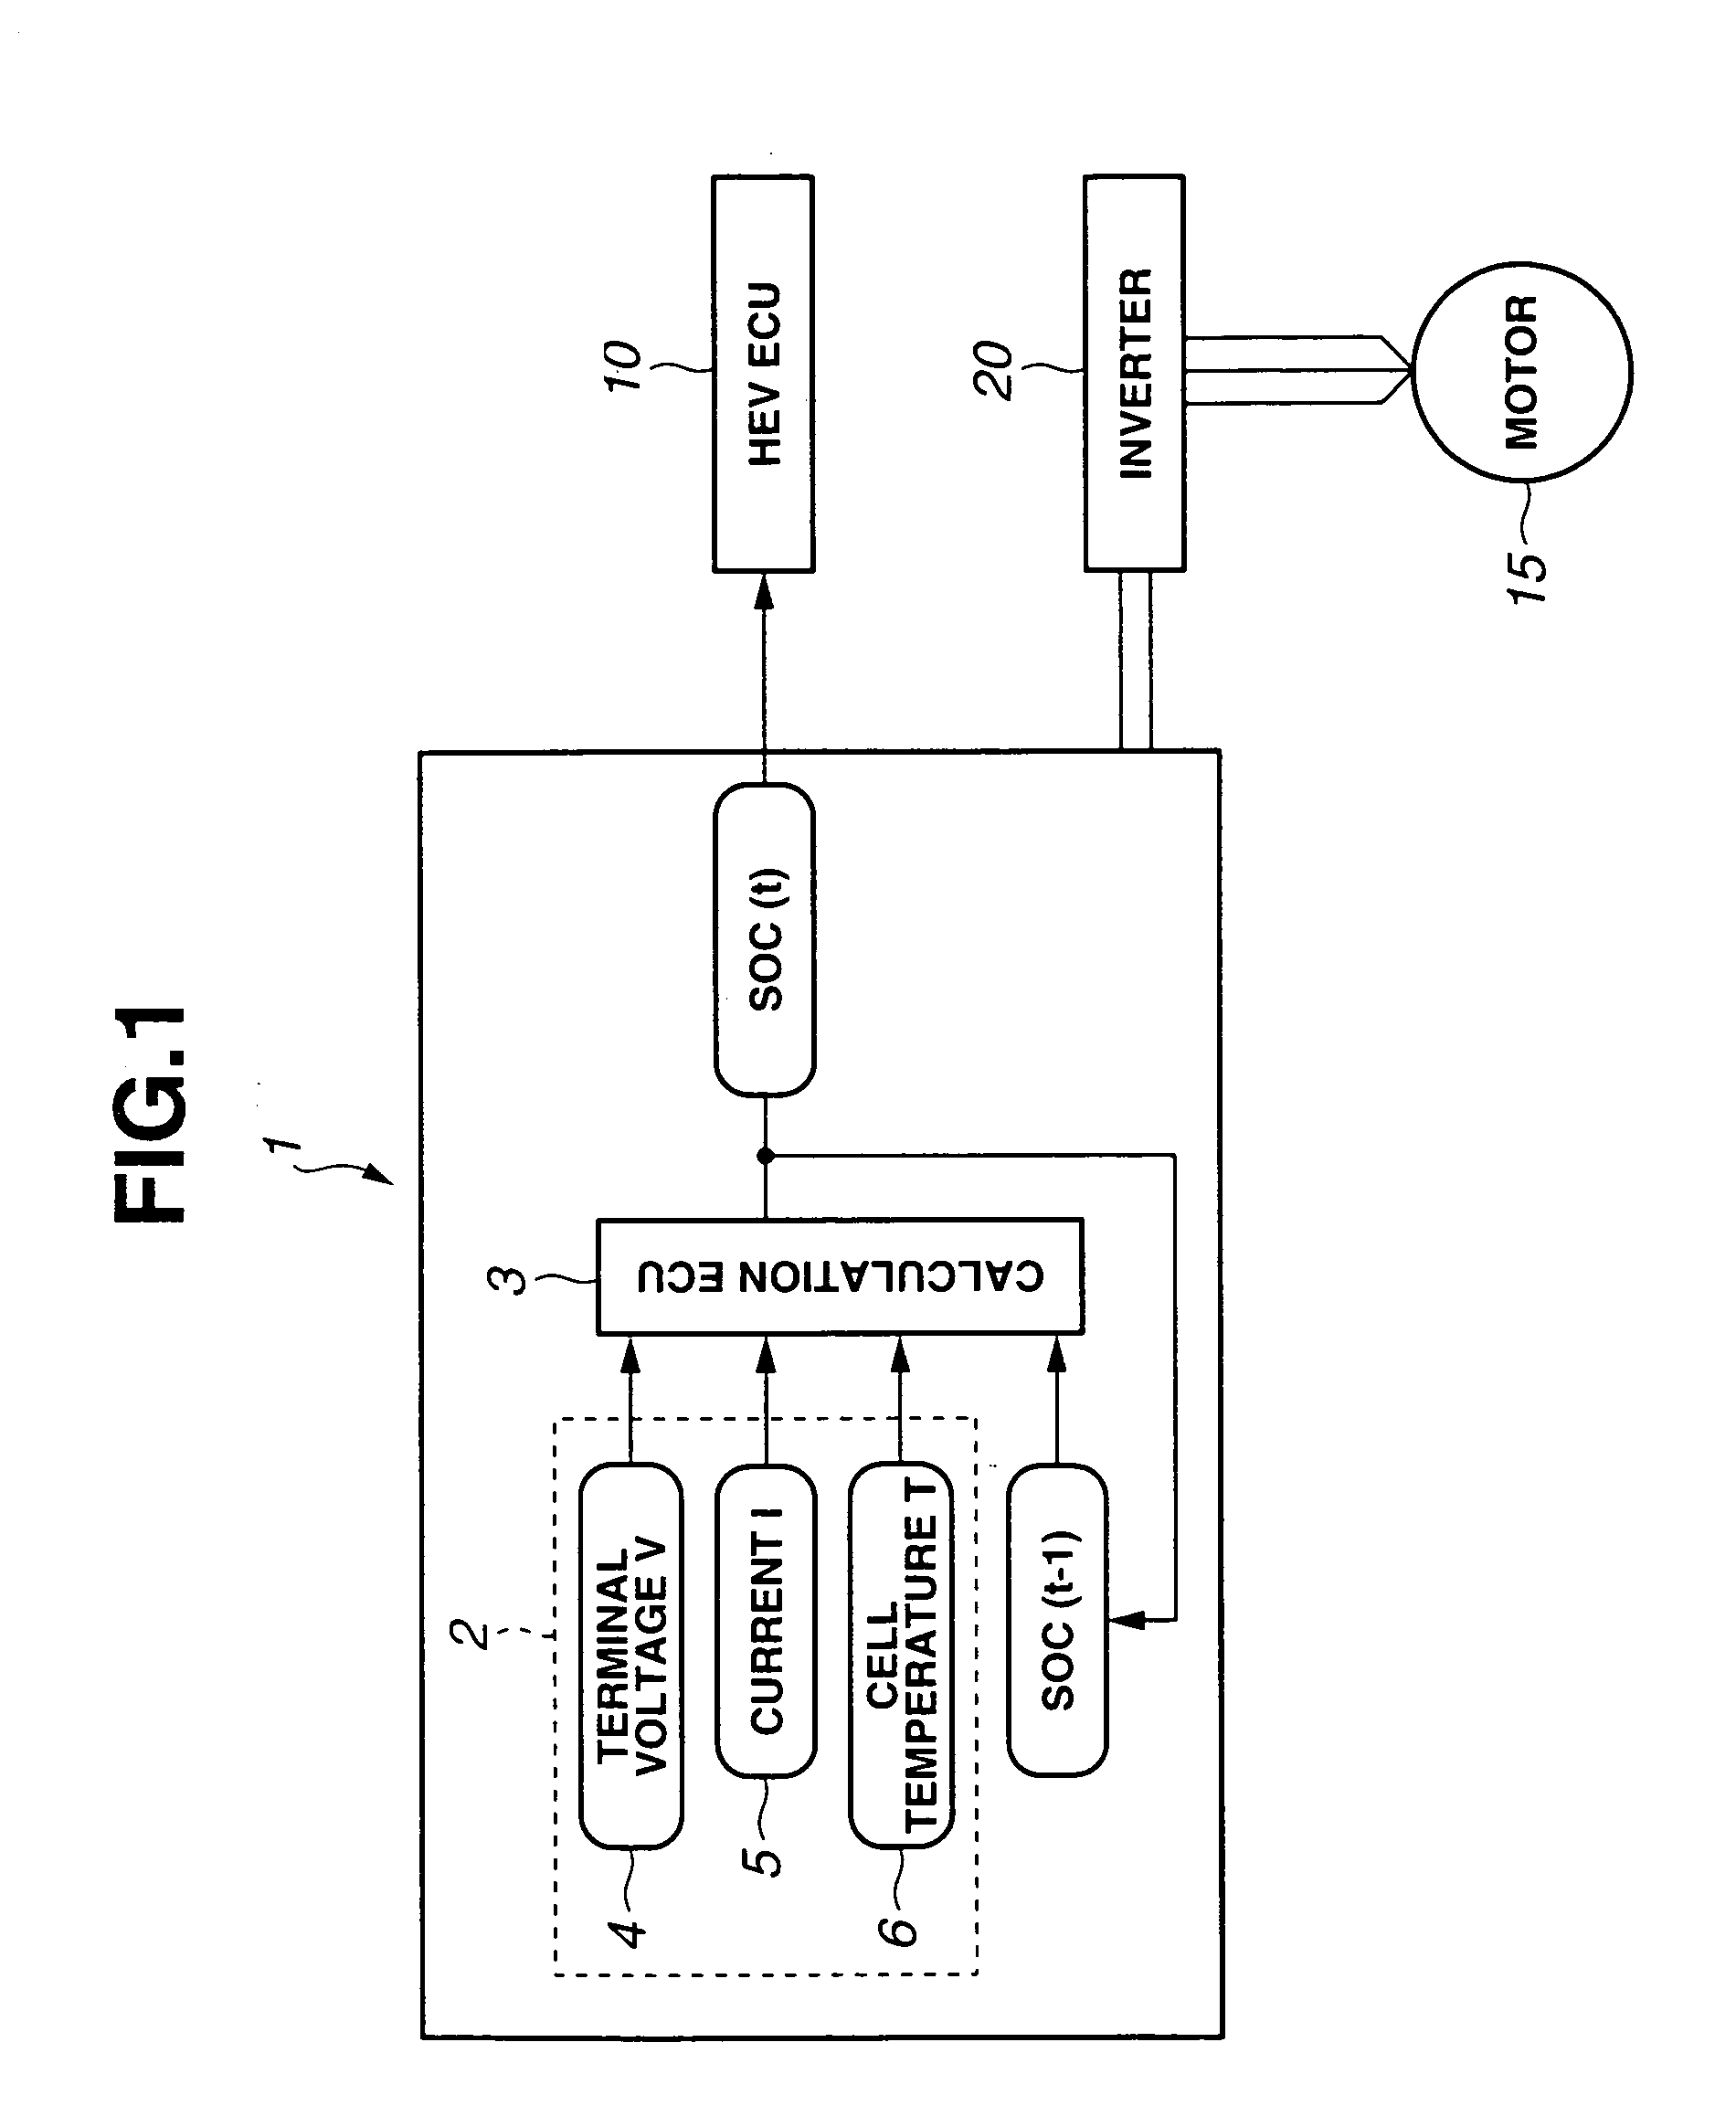 System for calculating remaining capacity of energy storage device